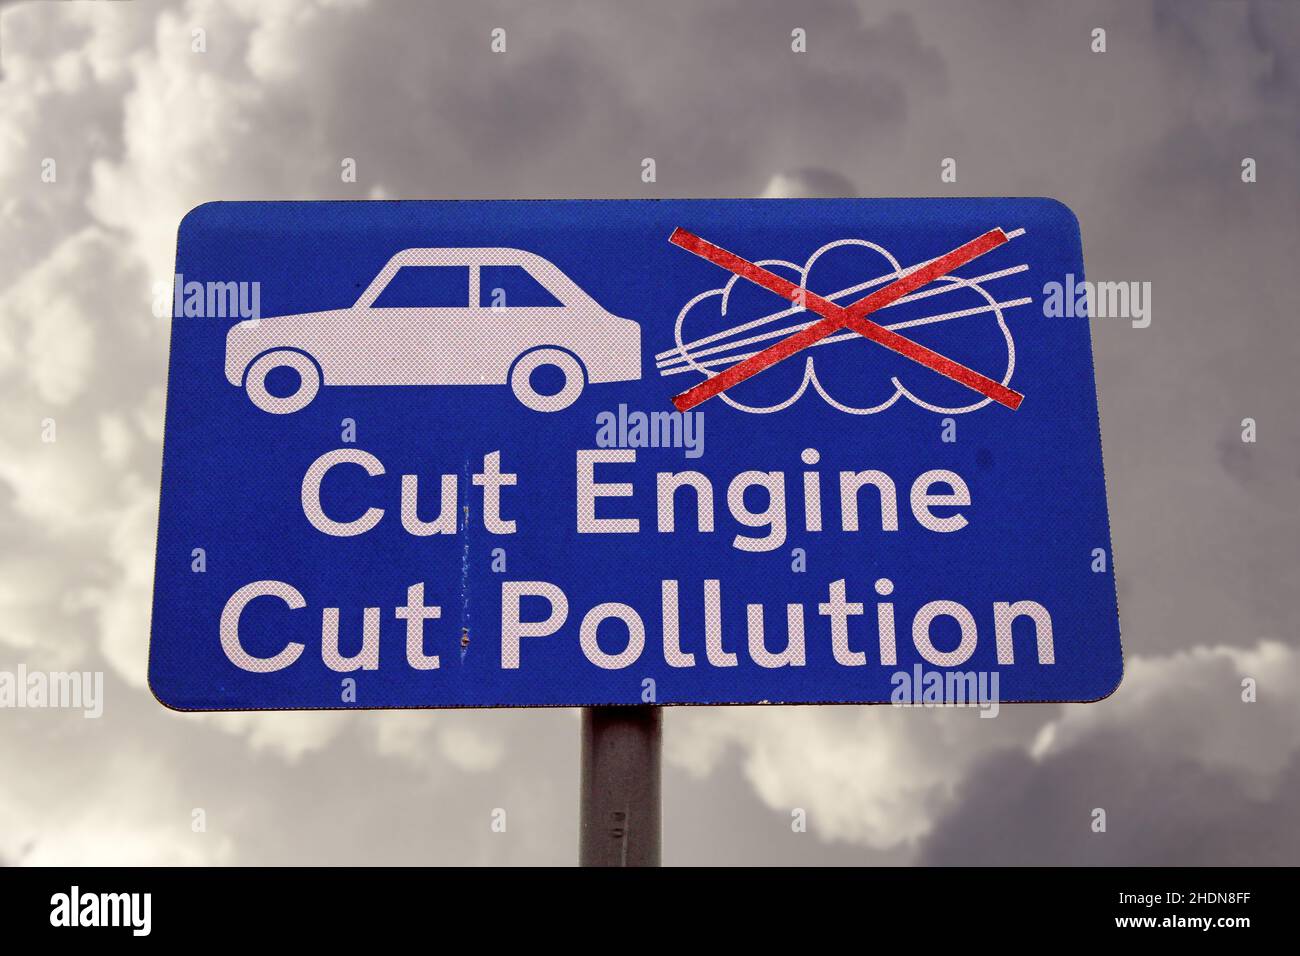 Cut Engine Cut Pollution road sign Stock Photo